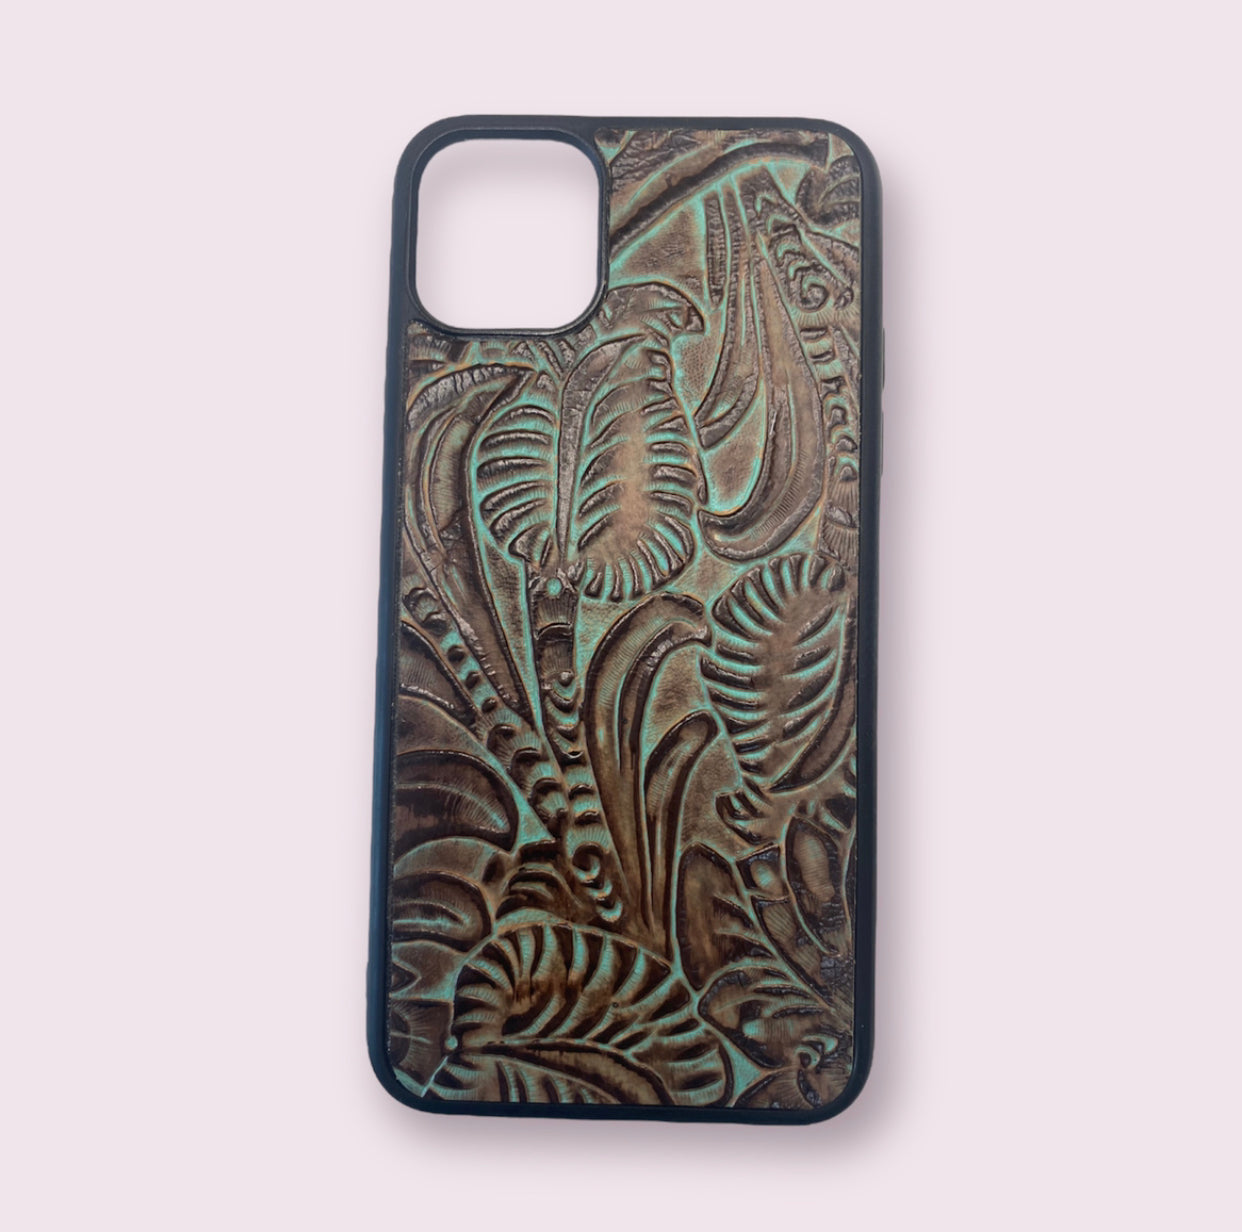 A8353 - IPhone 12 Pro Tooled Leather Case